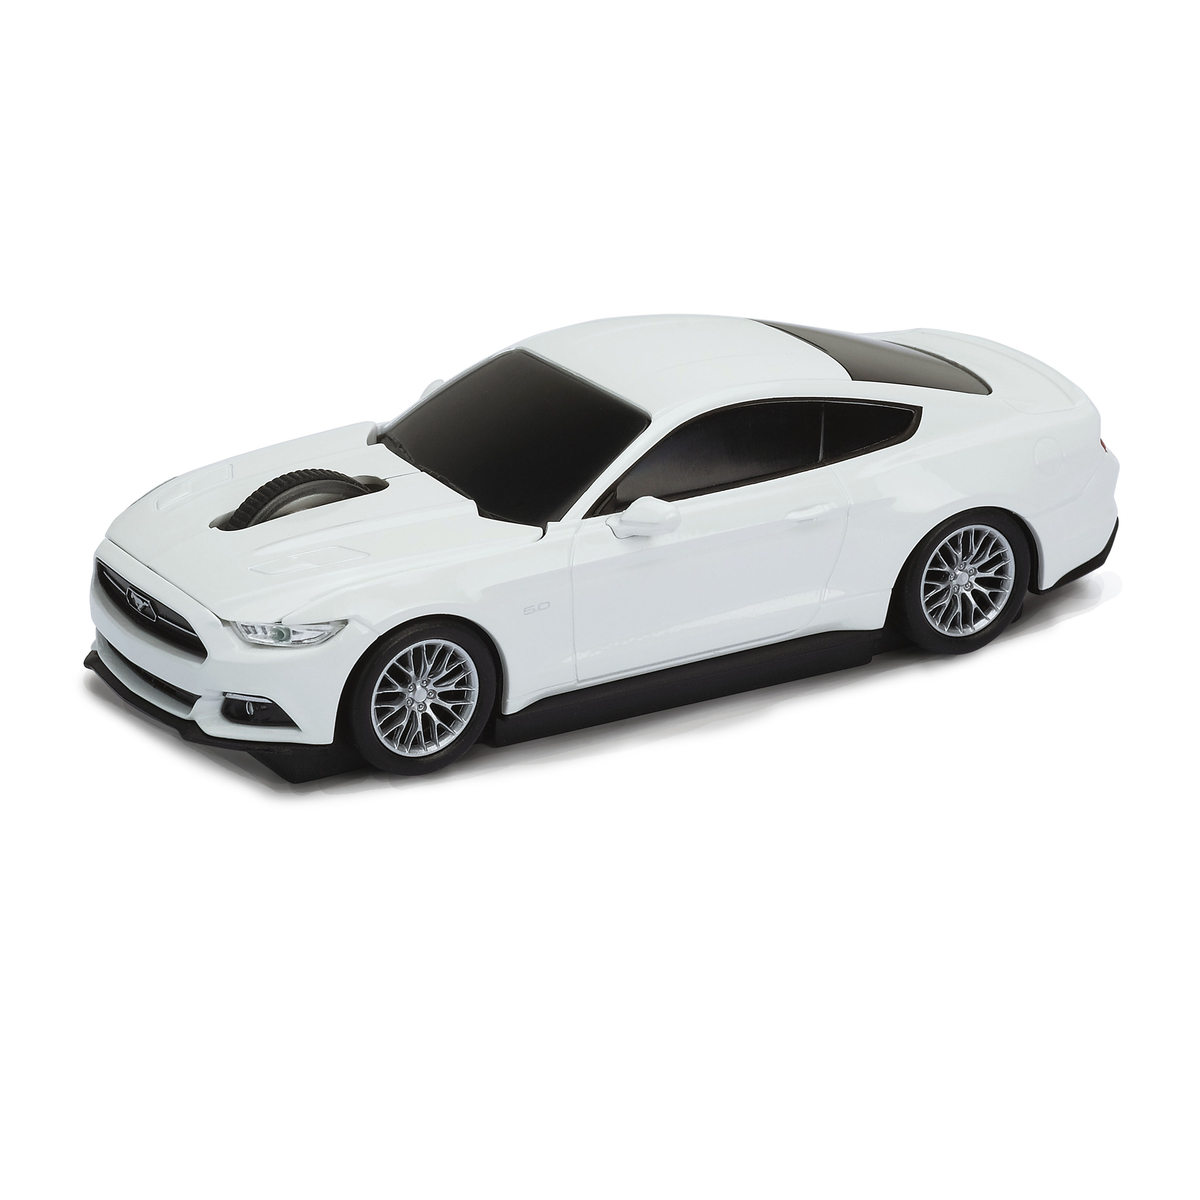 LM Computermaus Ford Mustang 1:32 WHITE weiß